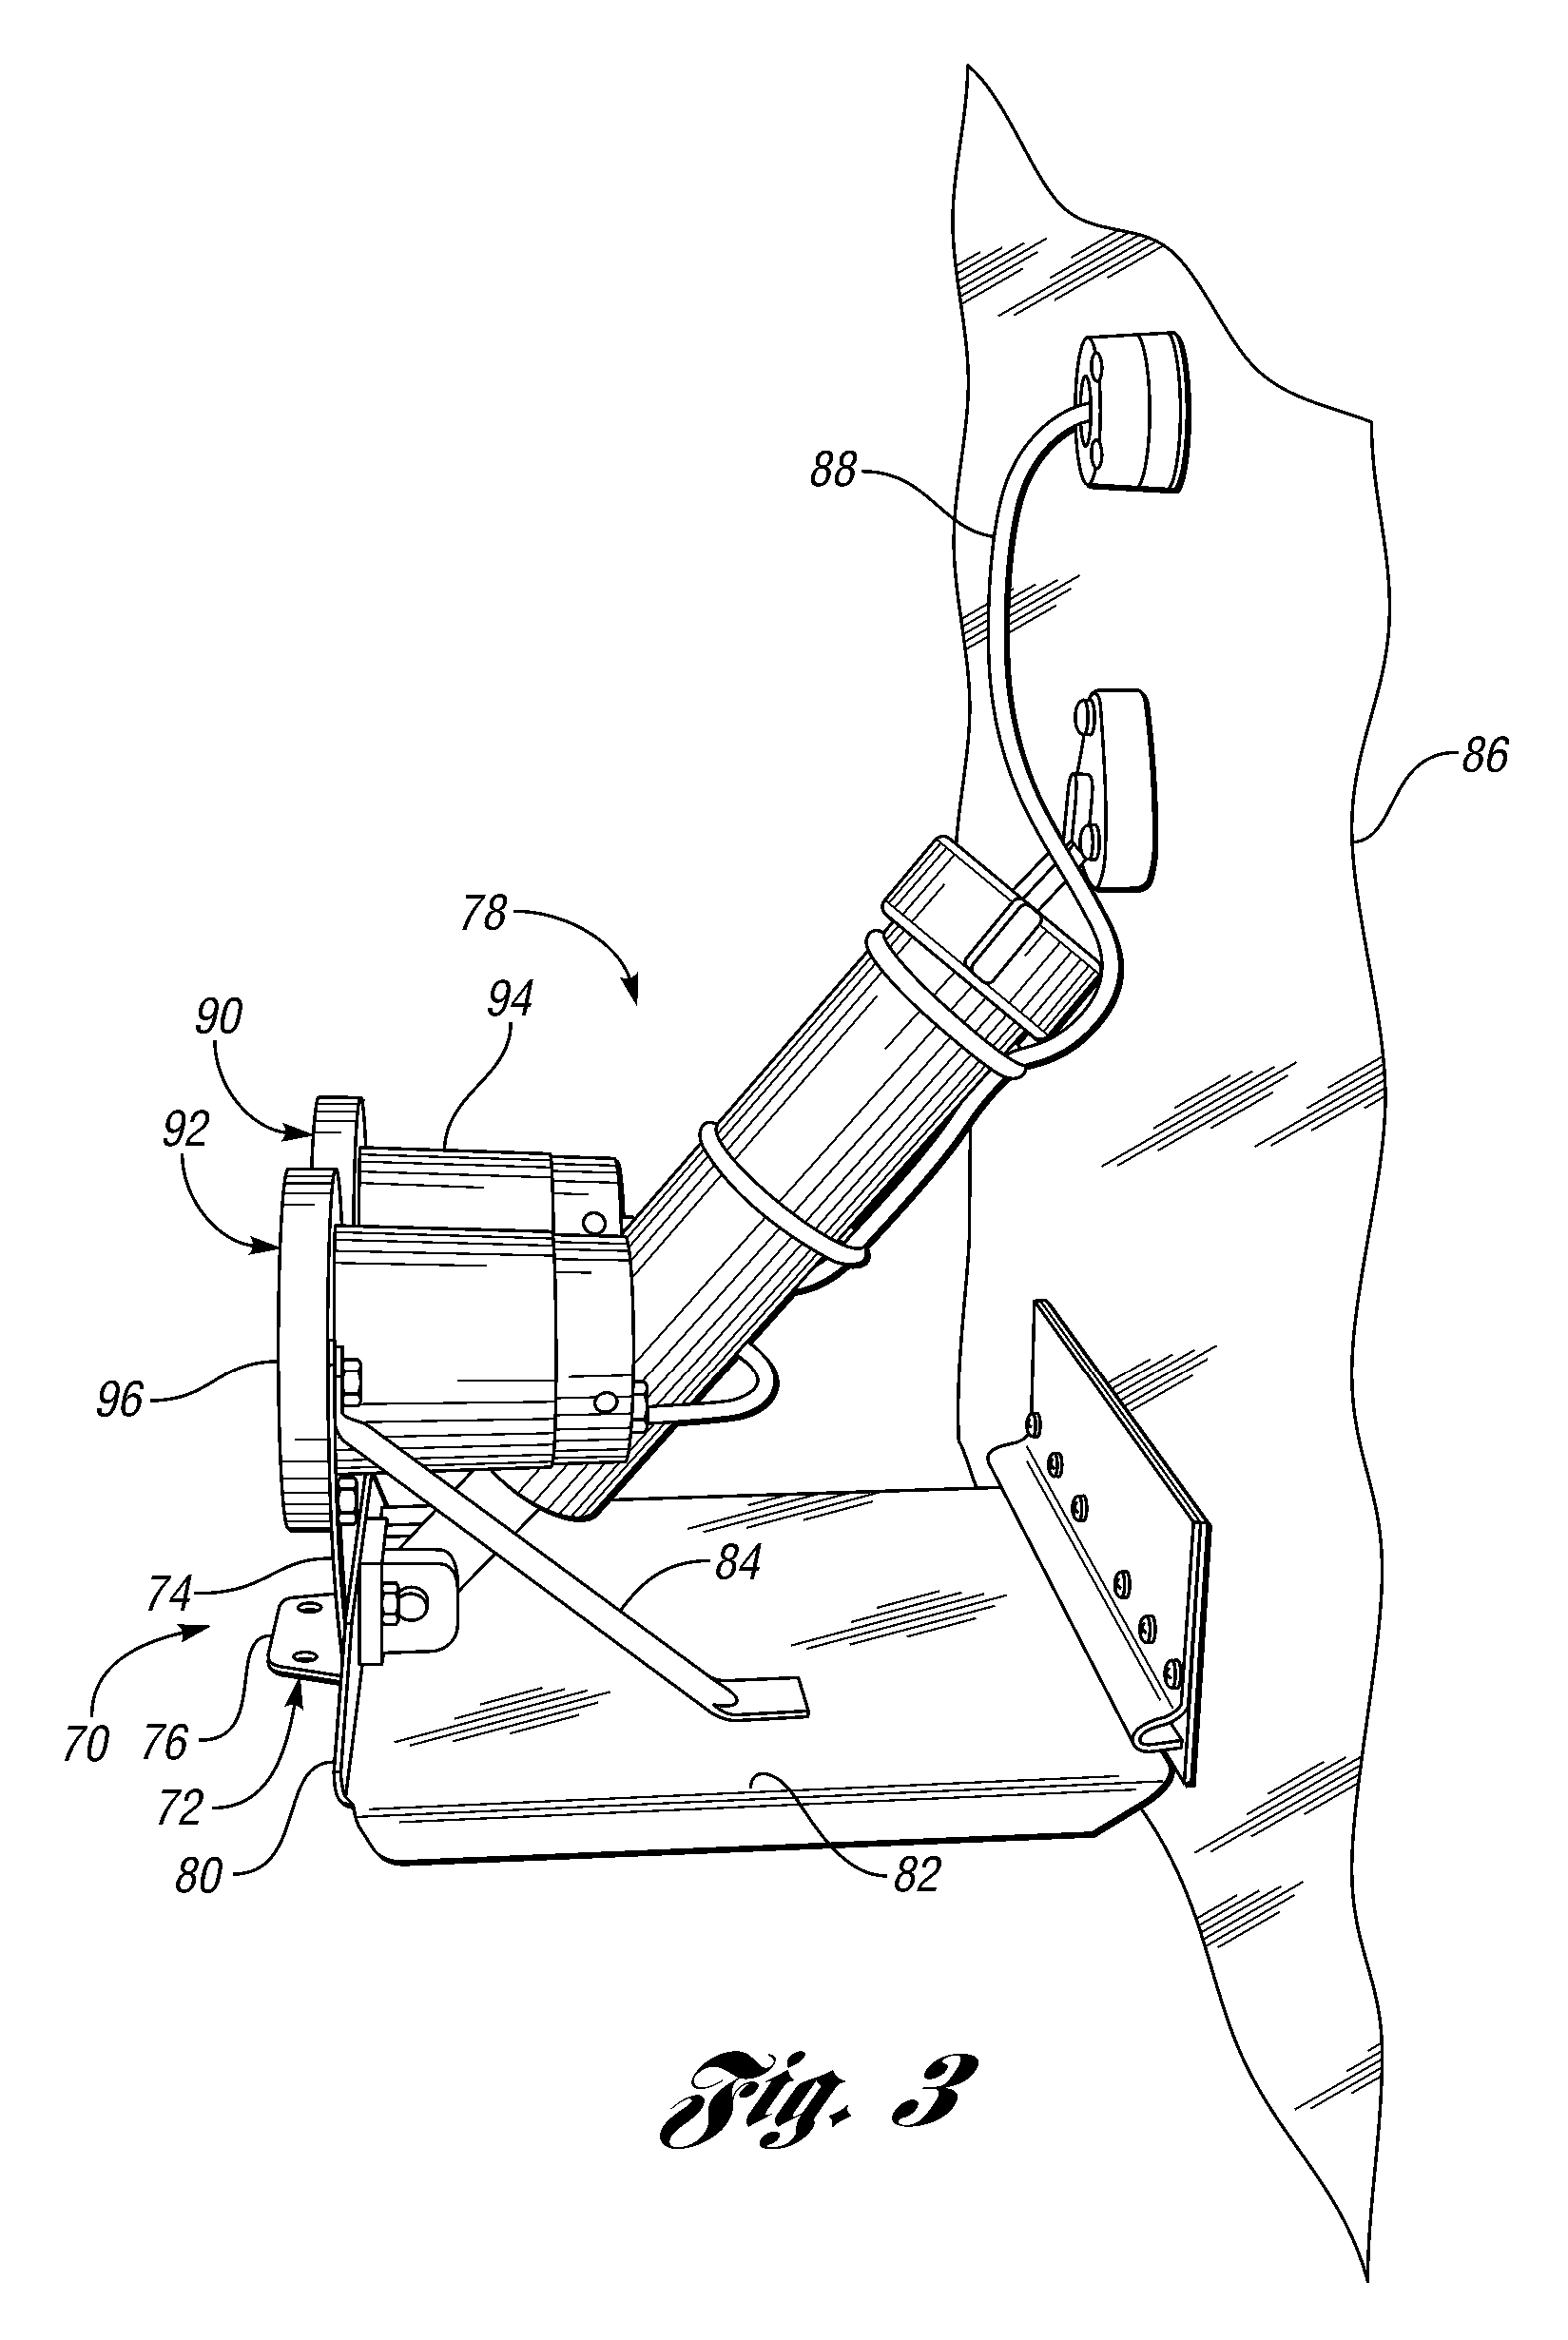 Marine light mounting system and method for producing same